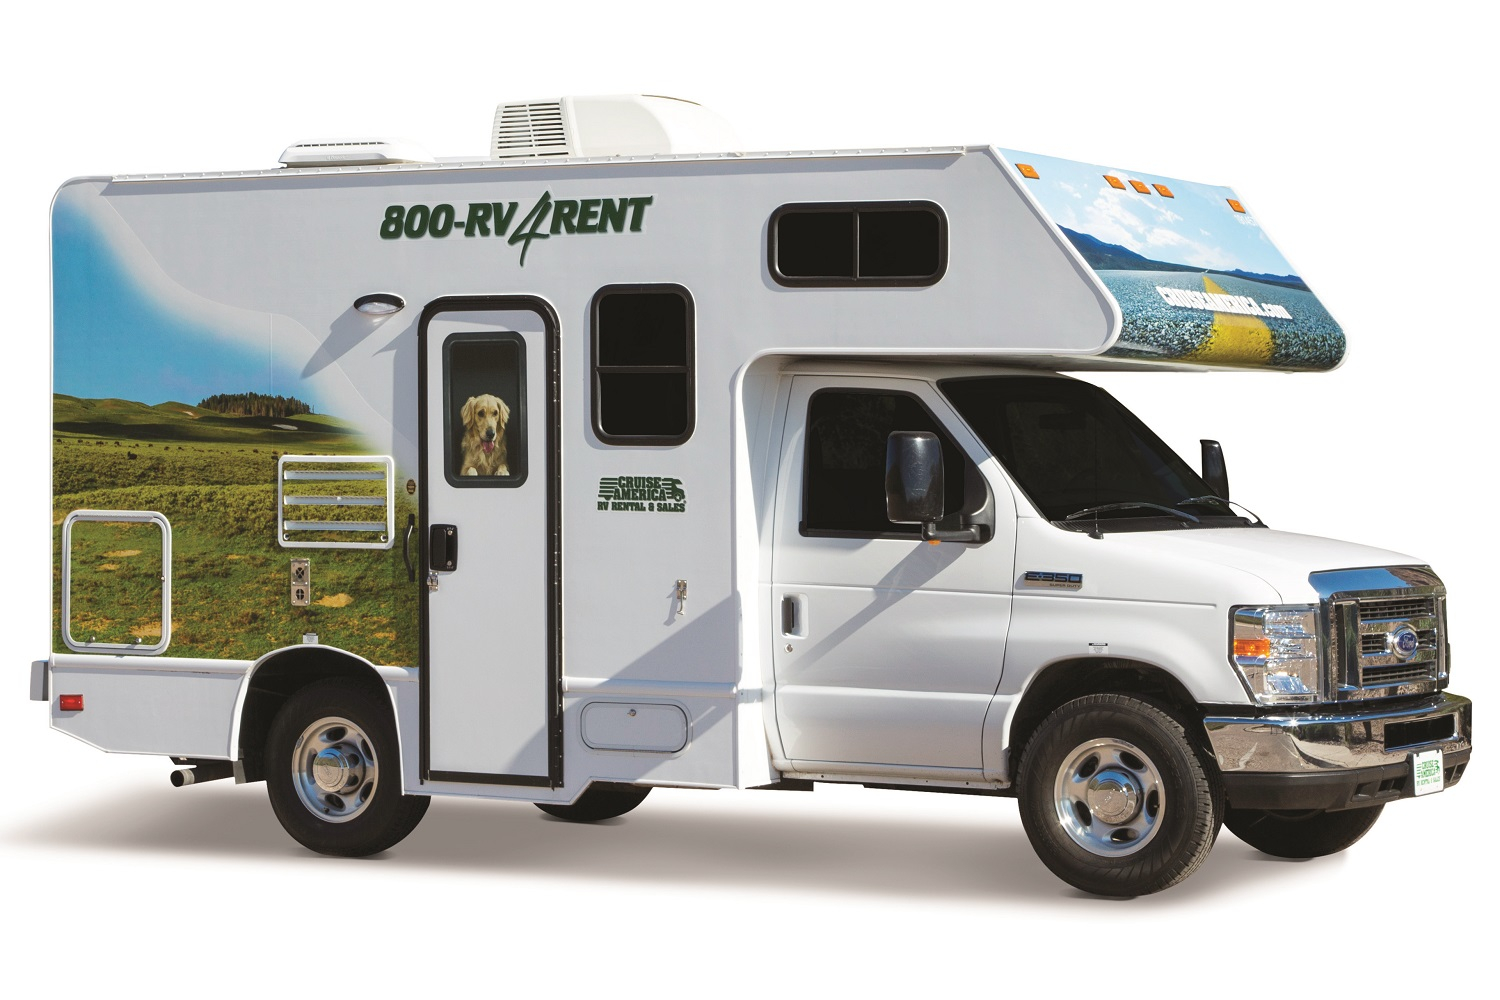 C19 Compact Motorhome Rv Rental Calgary intended for sizing 1500 X 1000